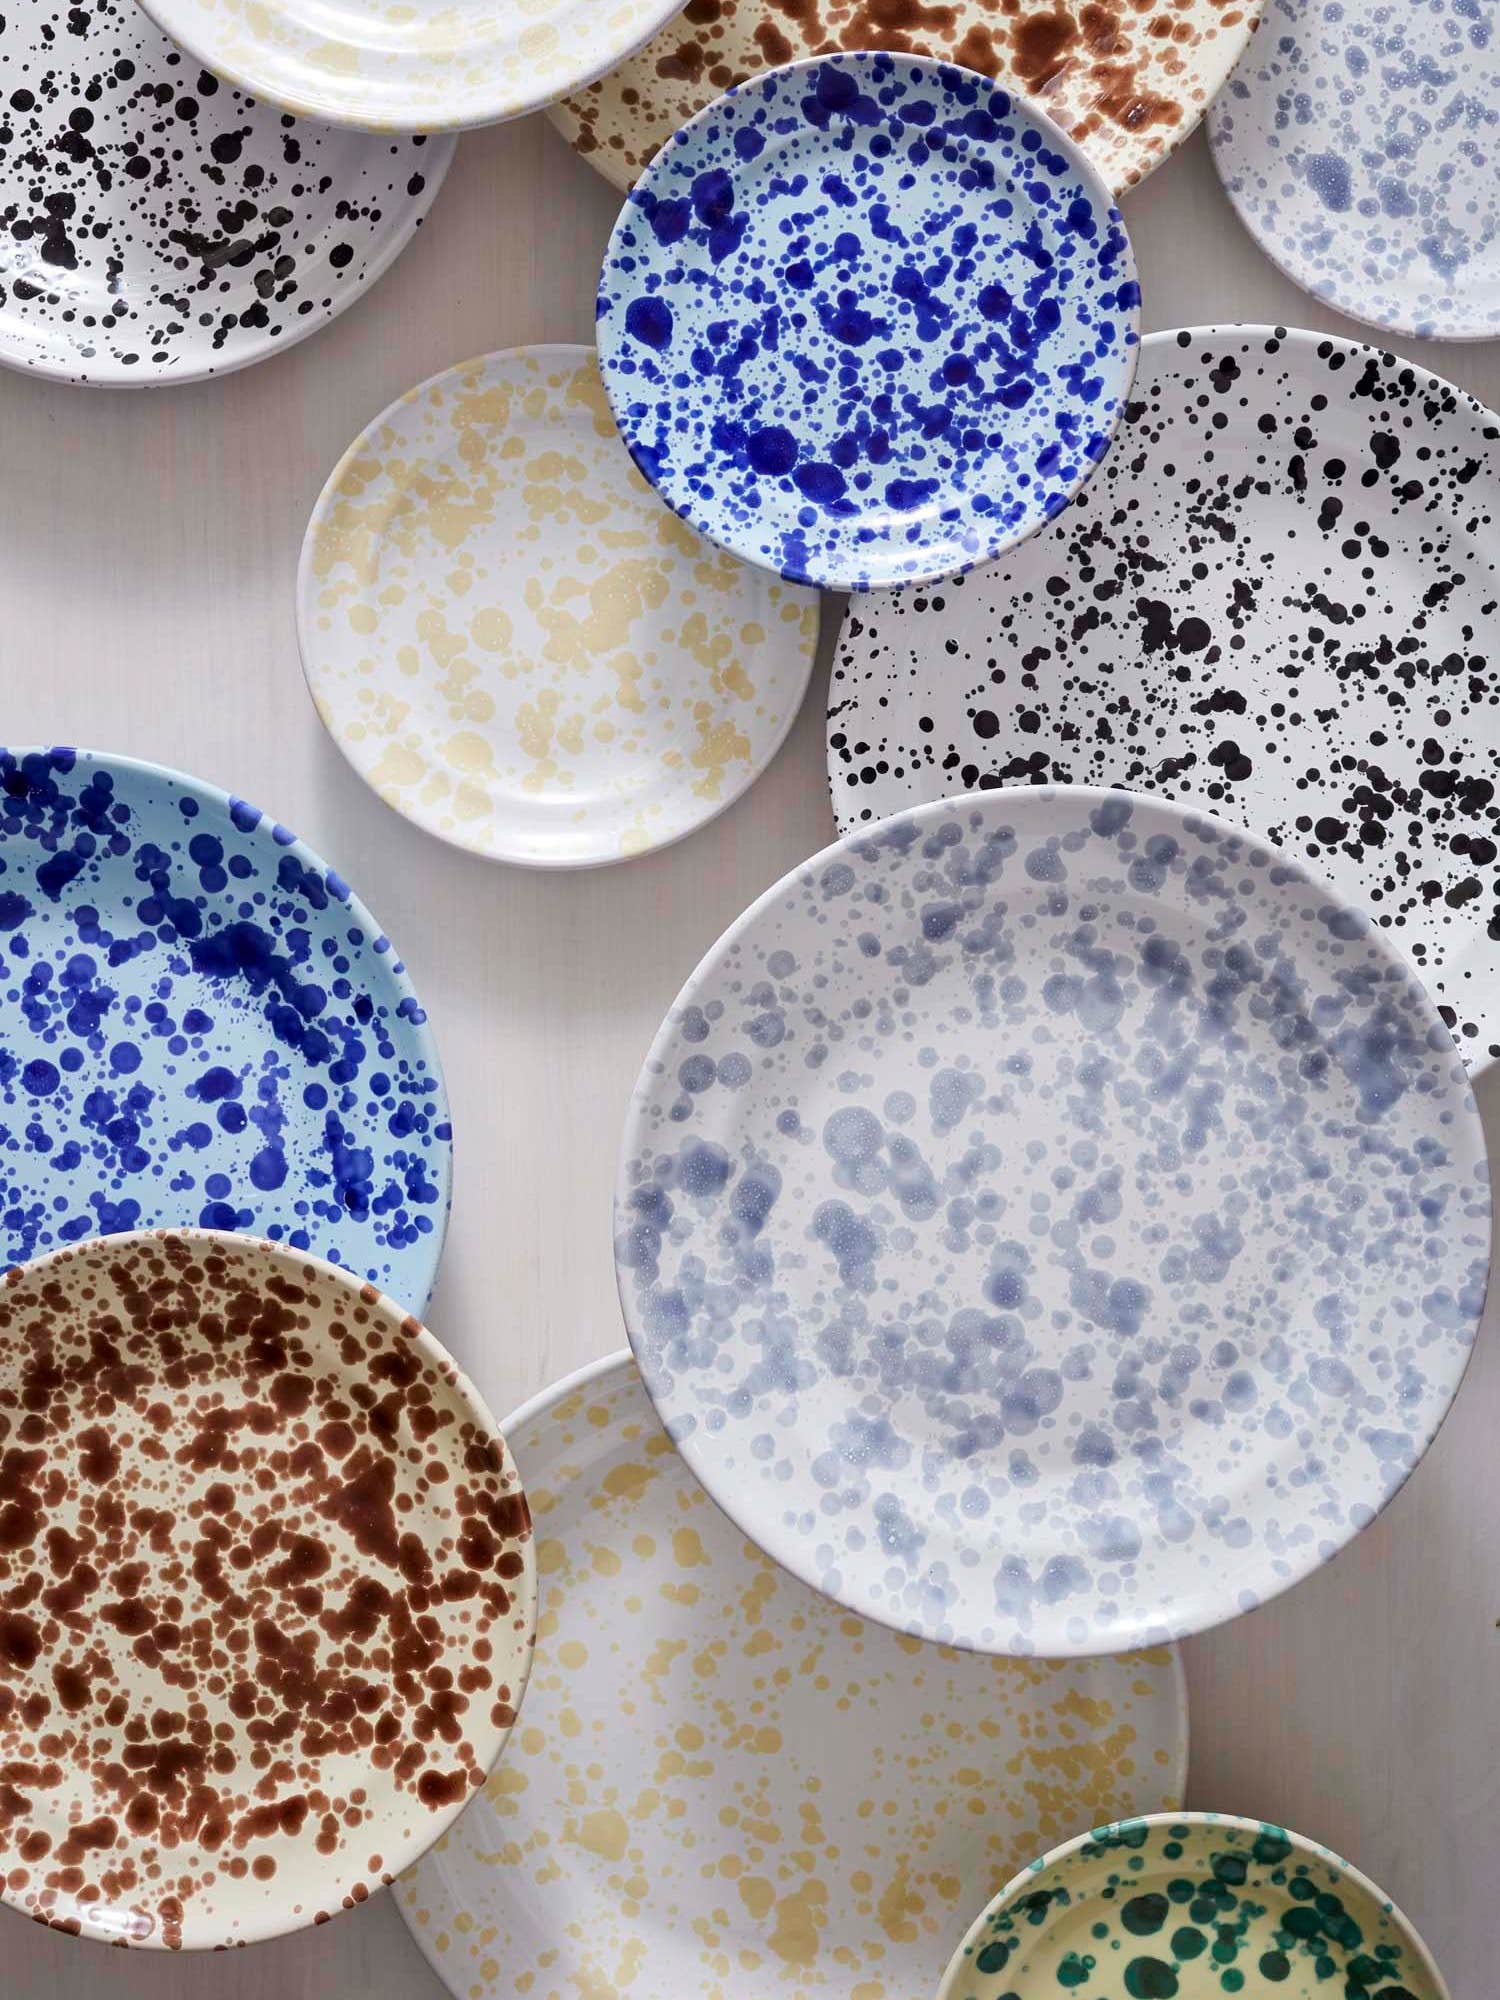 This Playful Pattern Will Remind You of Your Kindergarten Art Class